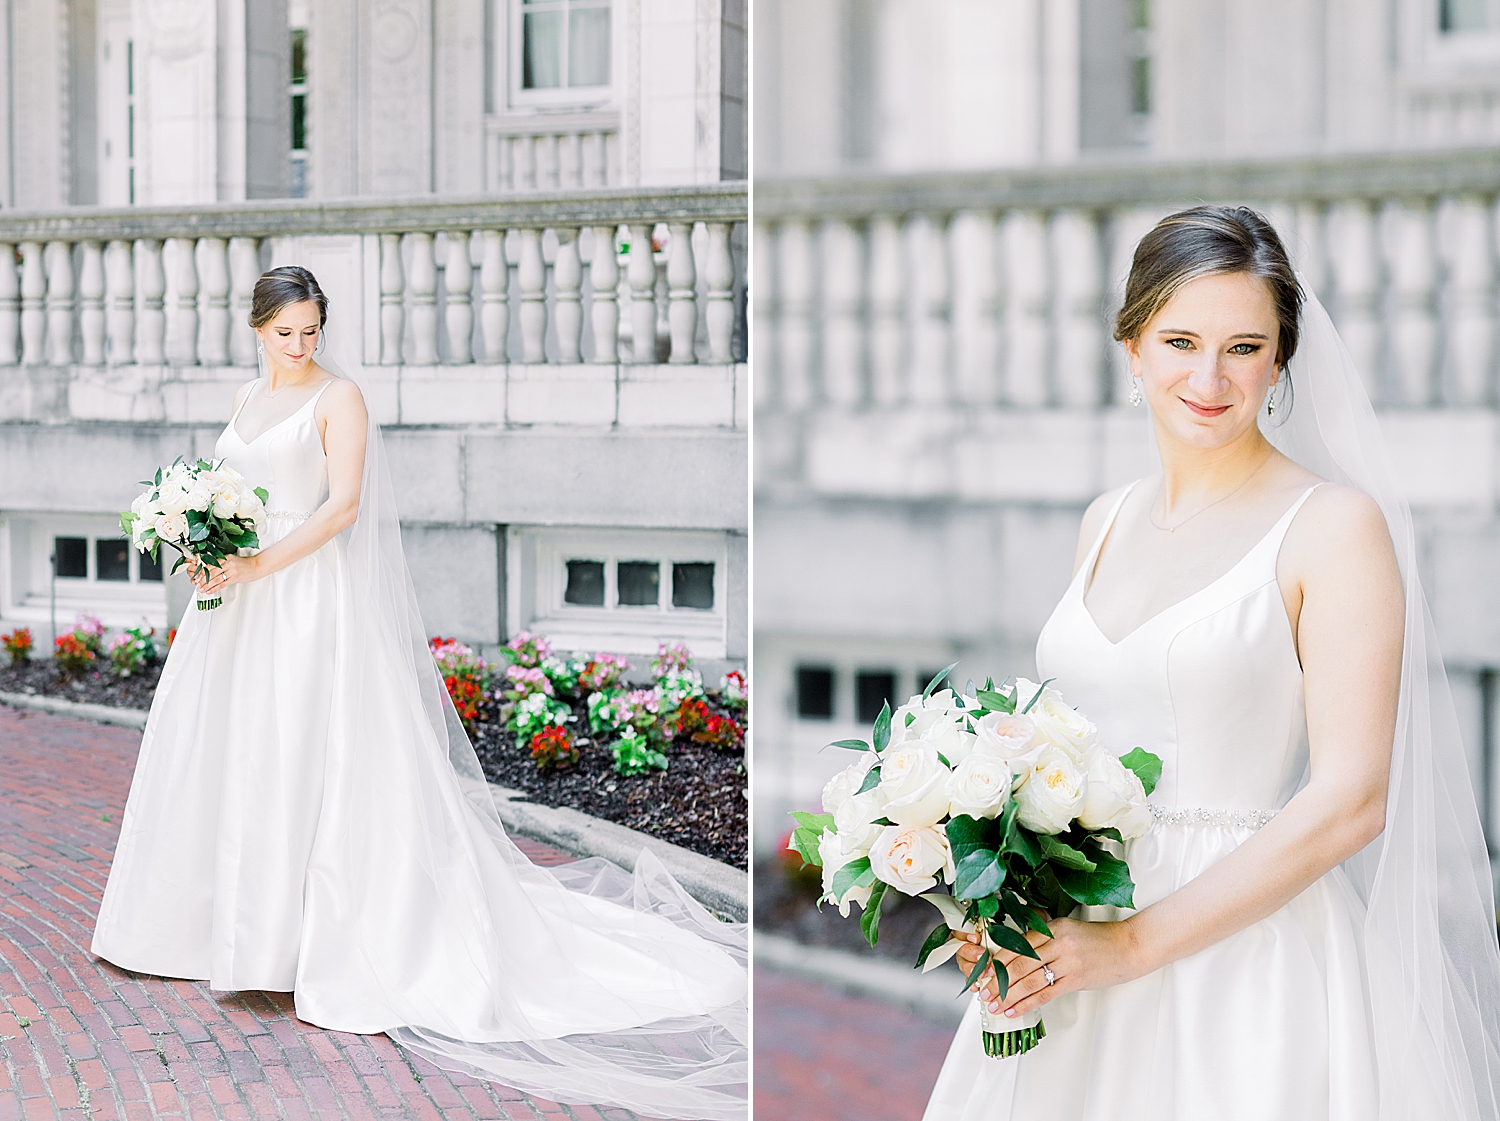 Tutwiler Hotel bridal portraits of classic gown